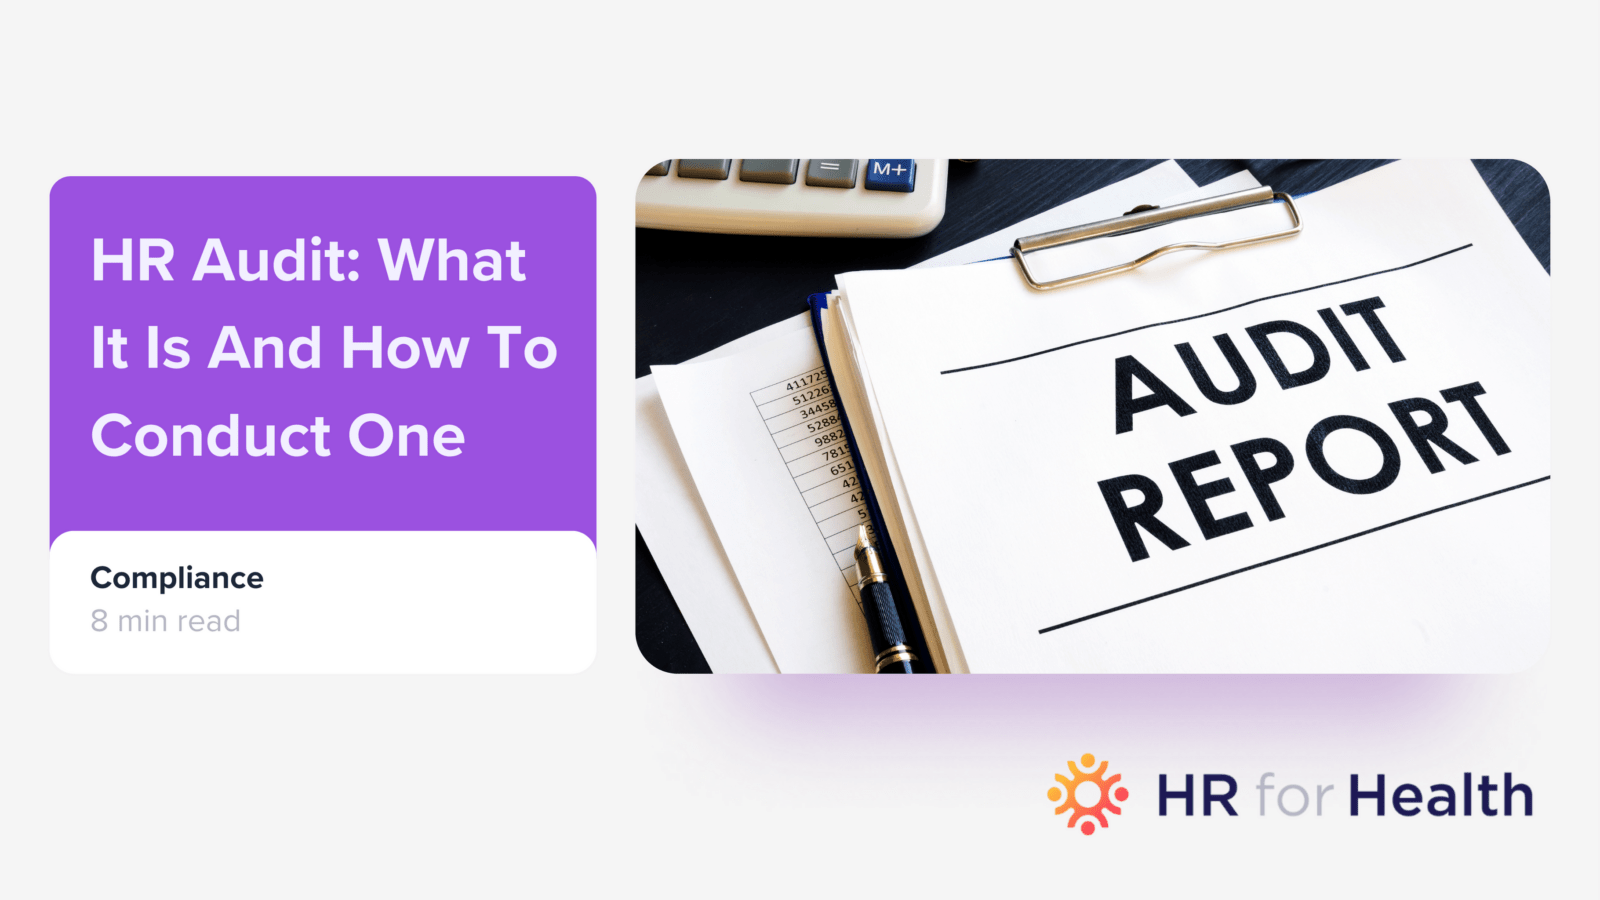 HR Audit: What It Is And How To Conduct One